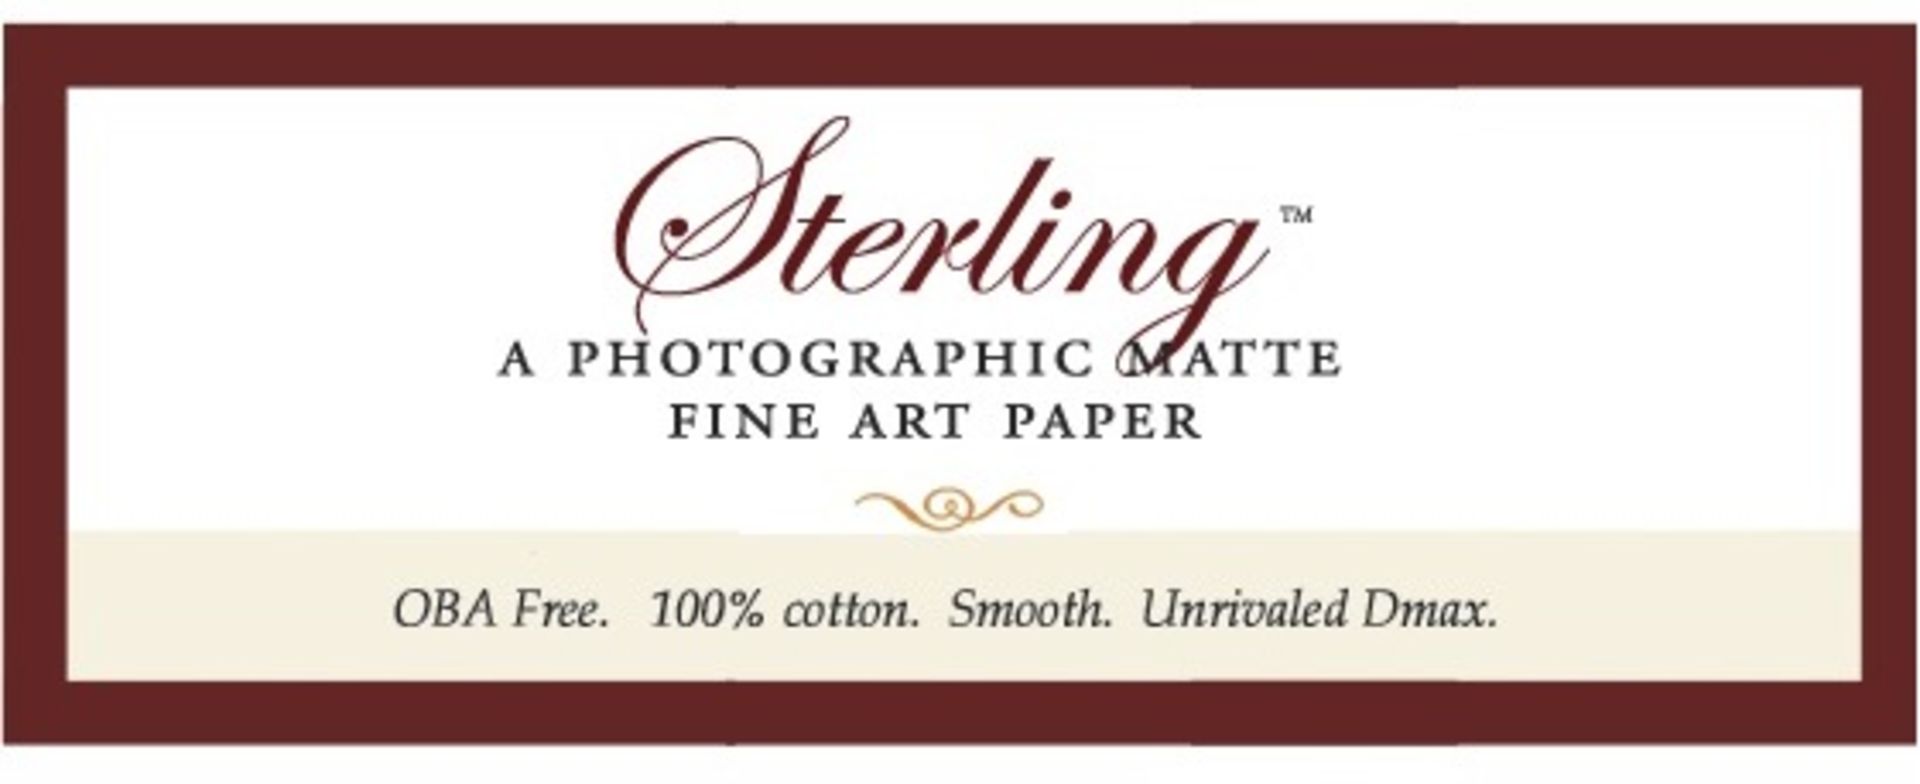 1 x Roll of Breathing Colour STERLING Photographic Matte Fine Art Paper - Size 17" x 50' - - Image 3 of 5